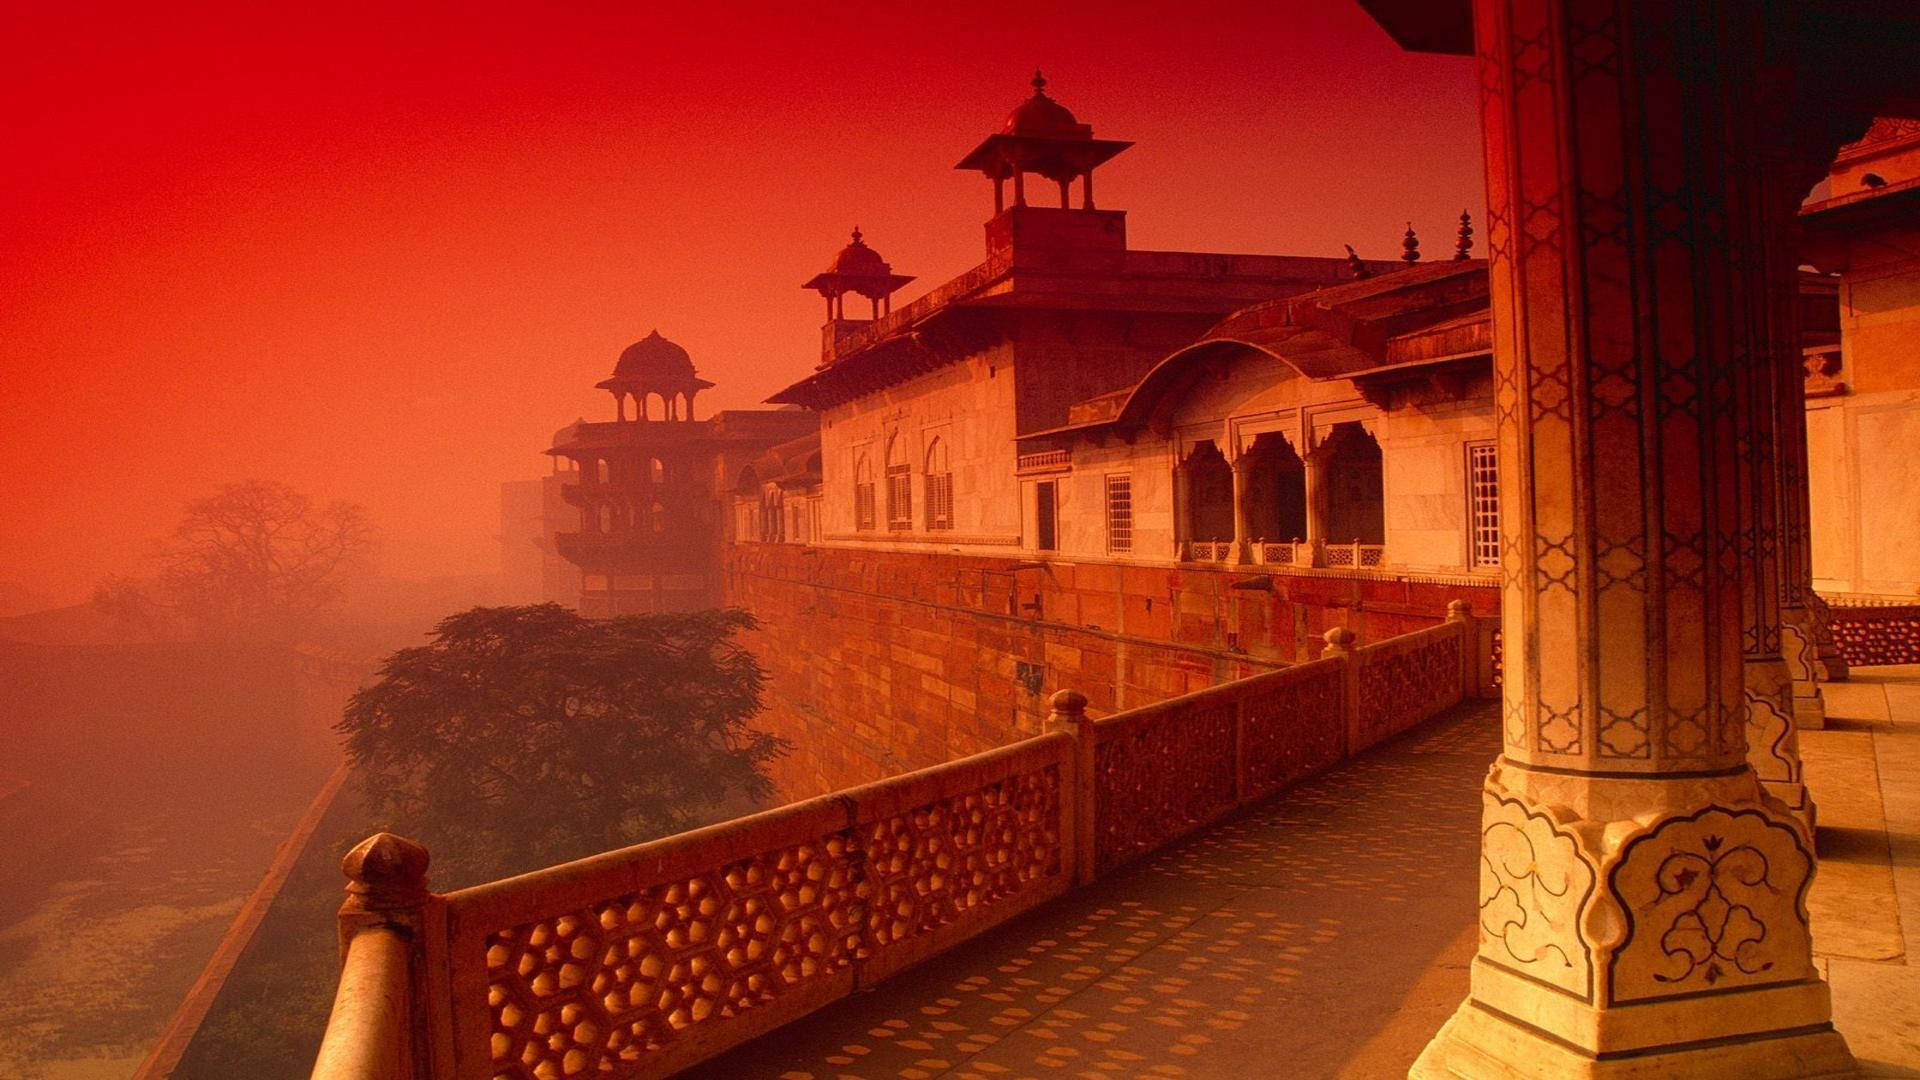 Kolkataagra Fort Can Be Translated To German As 